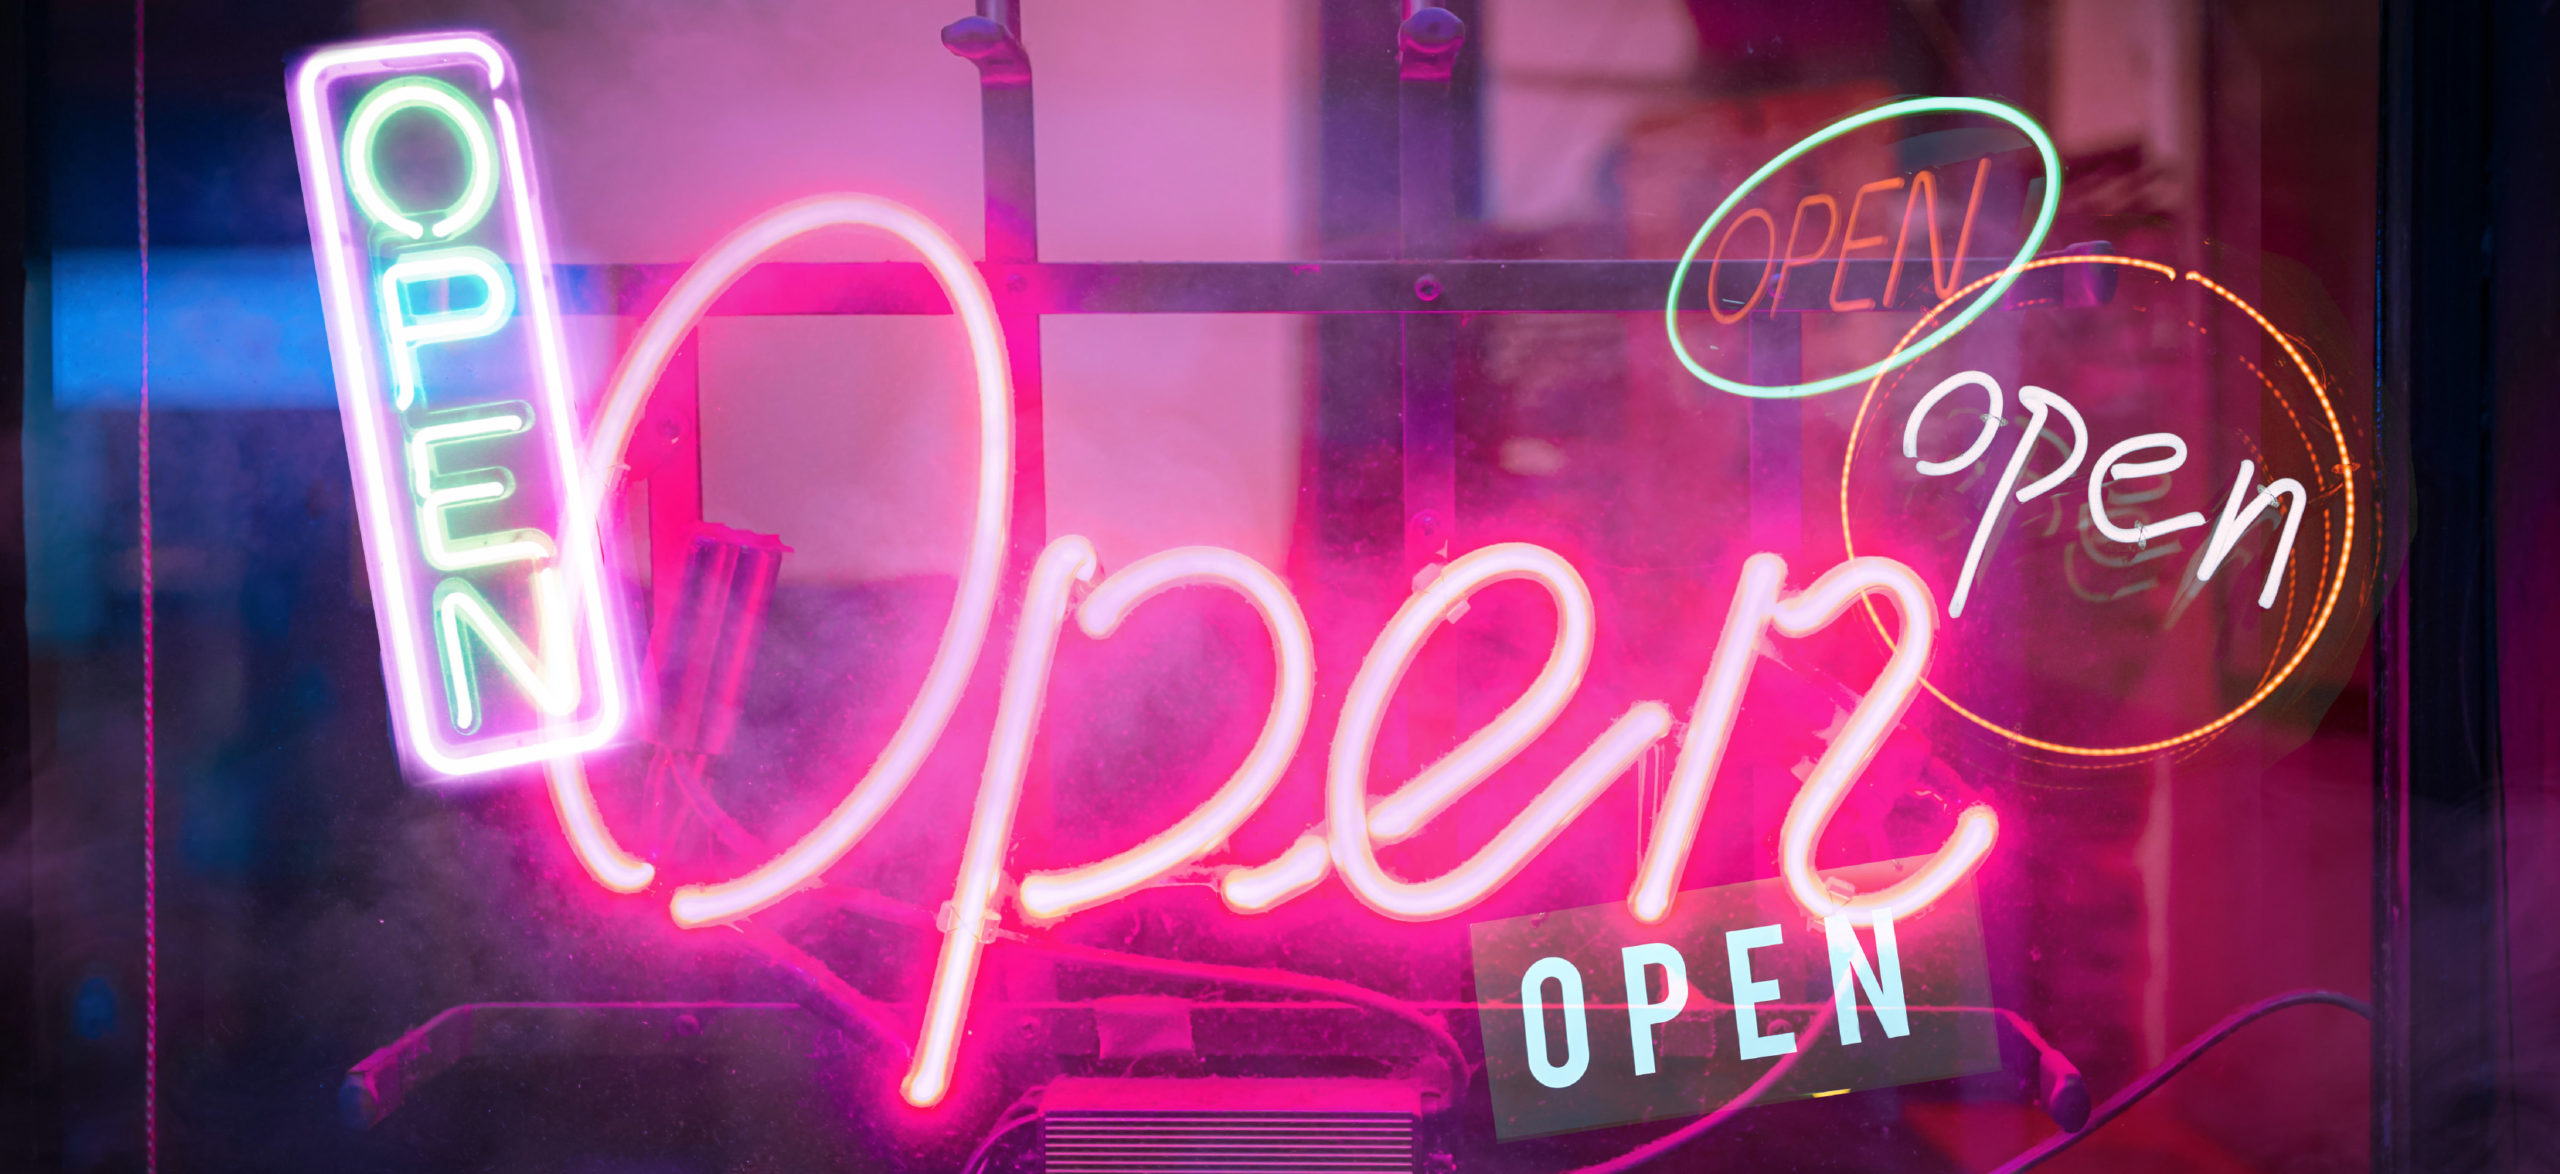 A photo illustration of several neon "Open" signs alight in the dark to signify re-opening of society after COVID-19